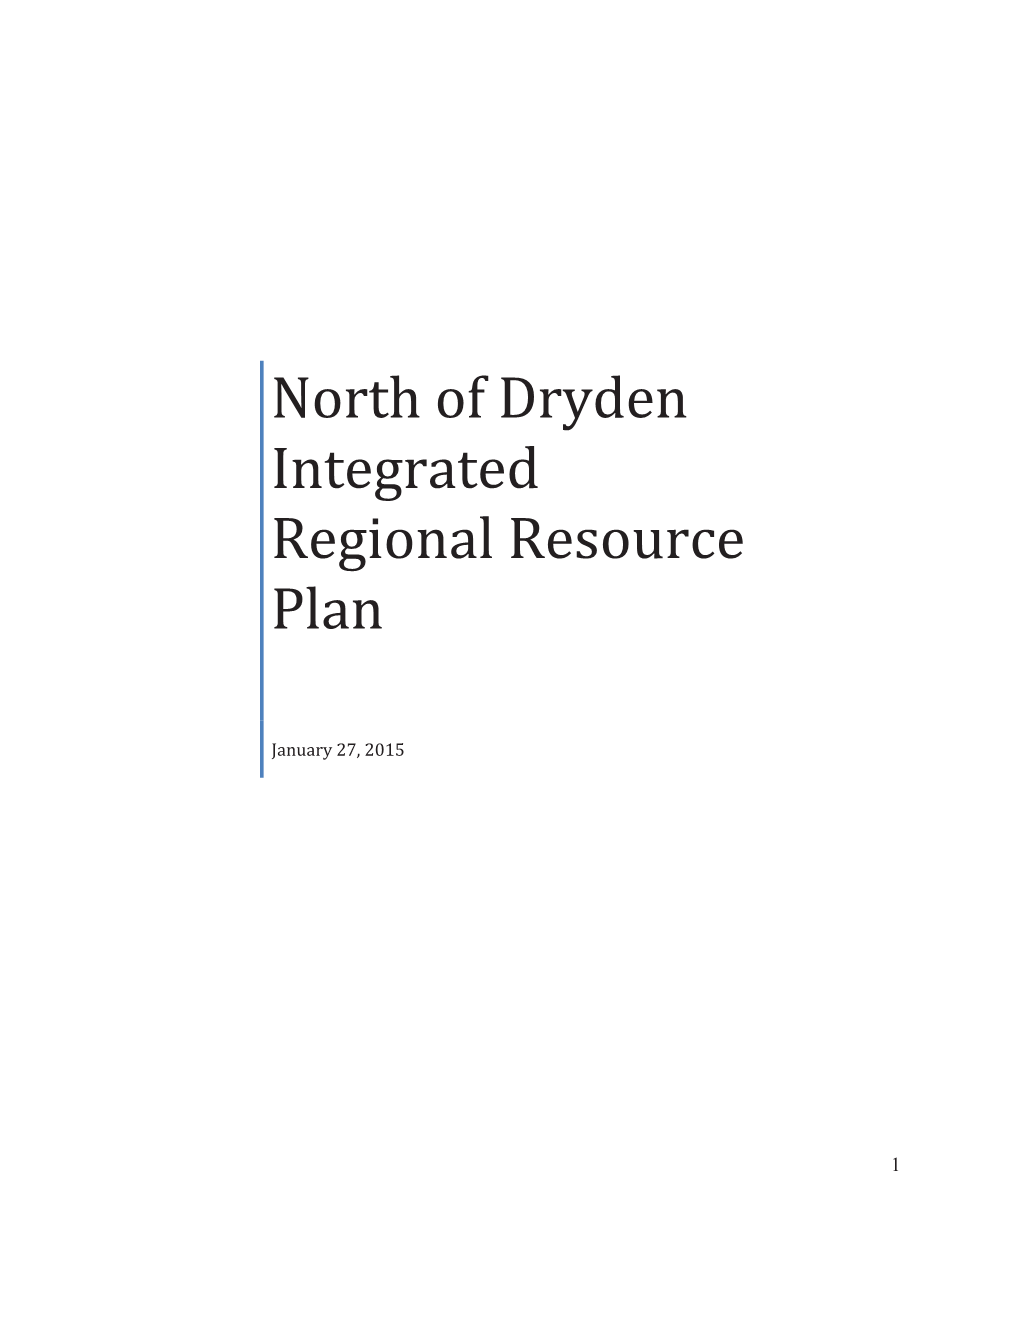 North of Dryden Integrated Regional Resource Plan